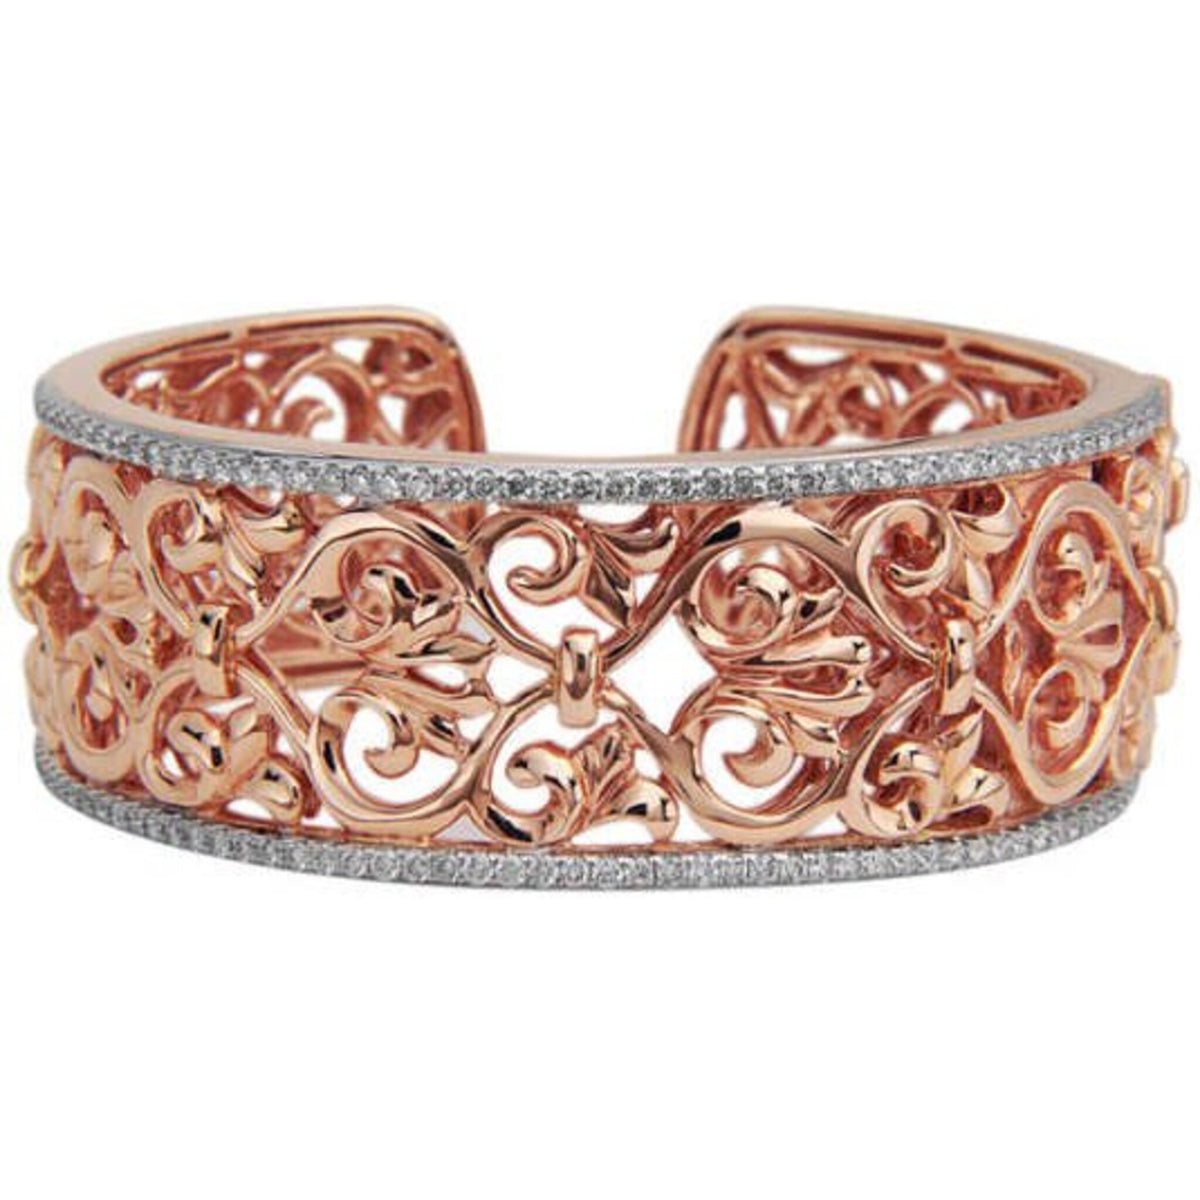 Charles Krypell - Diamond Ivy Lace Wide Cuff - Rose Gold & Diamond